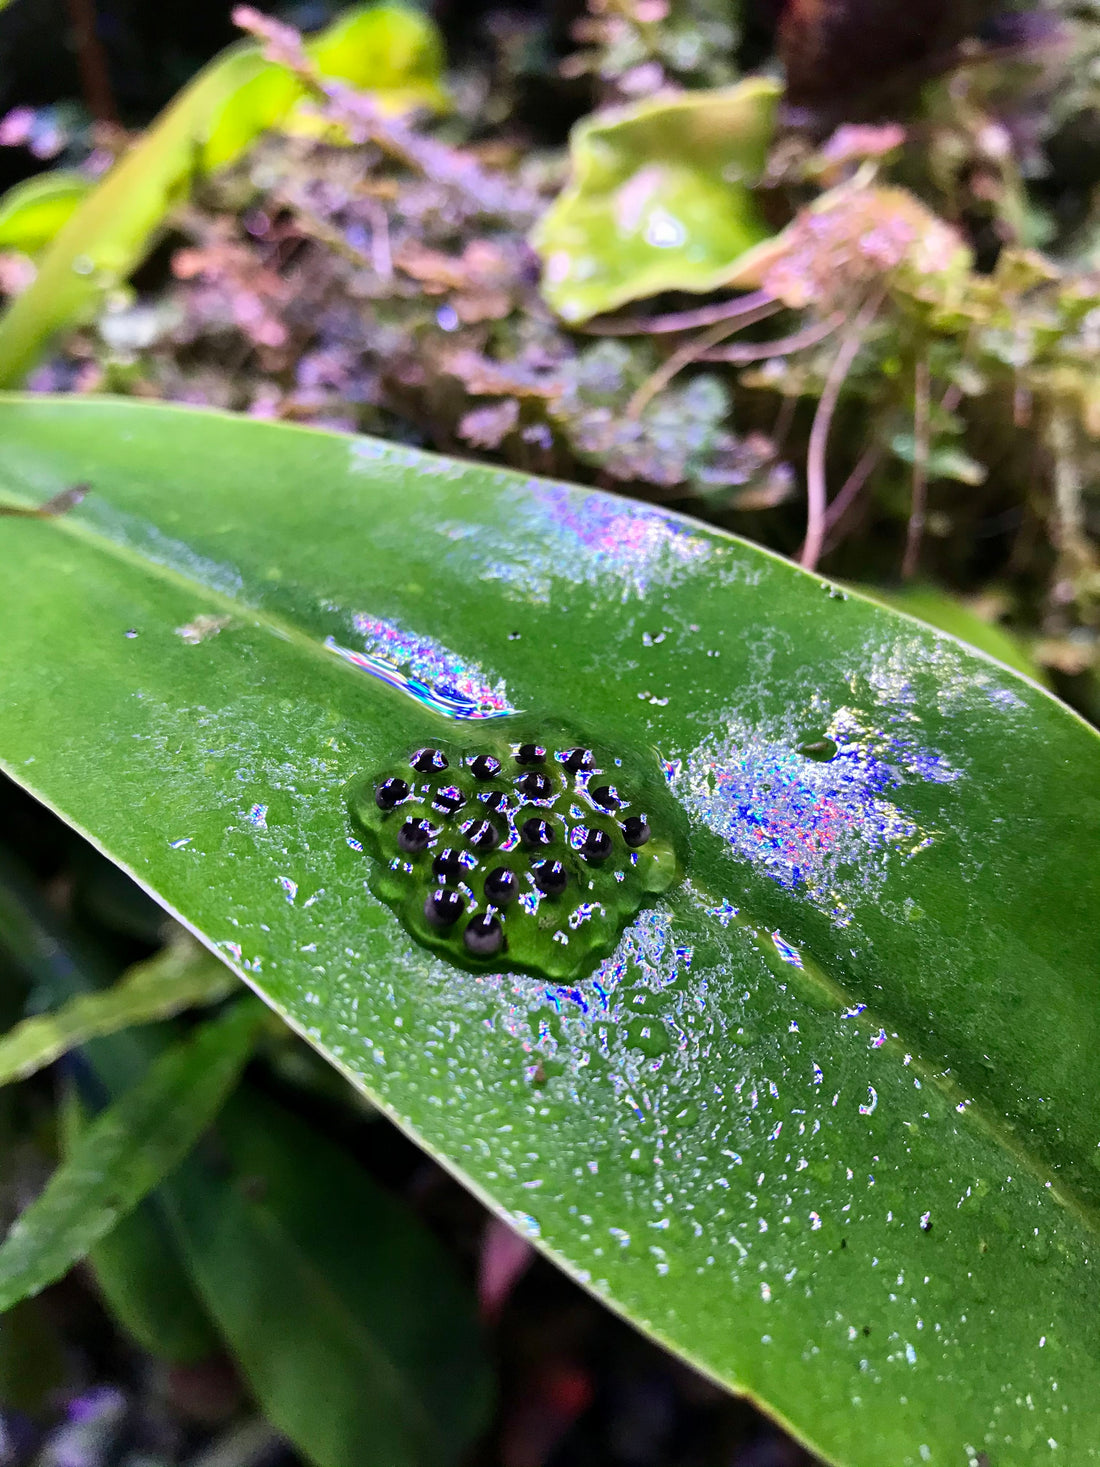 How to Care for Dart Frog Eggs